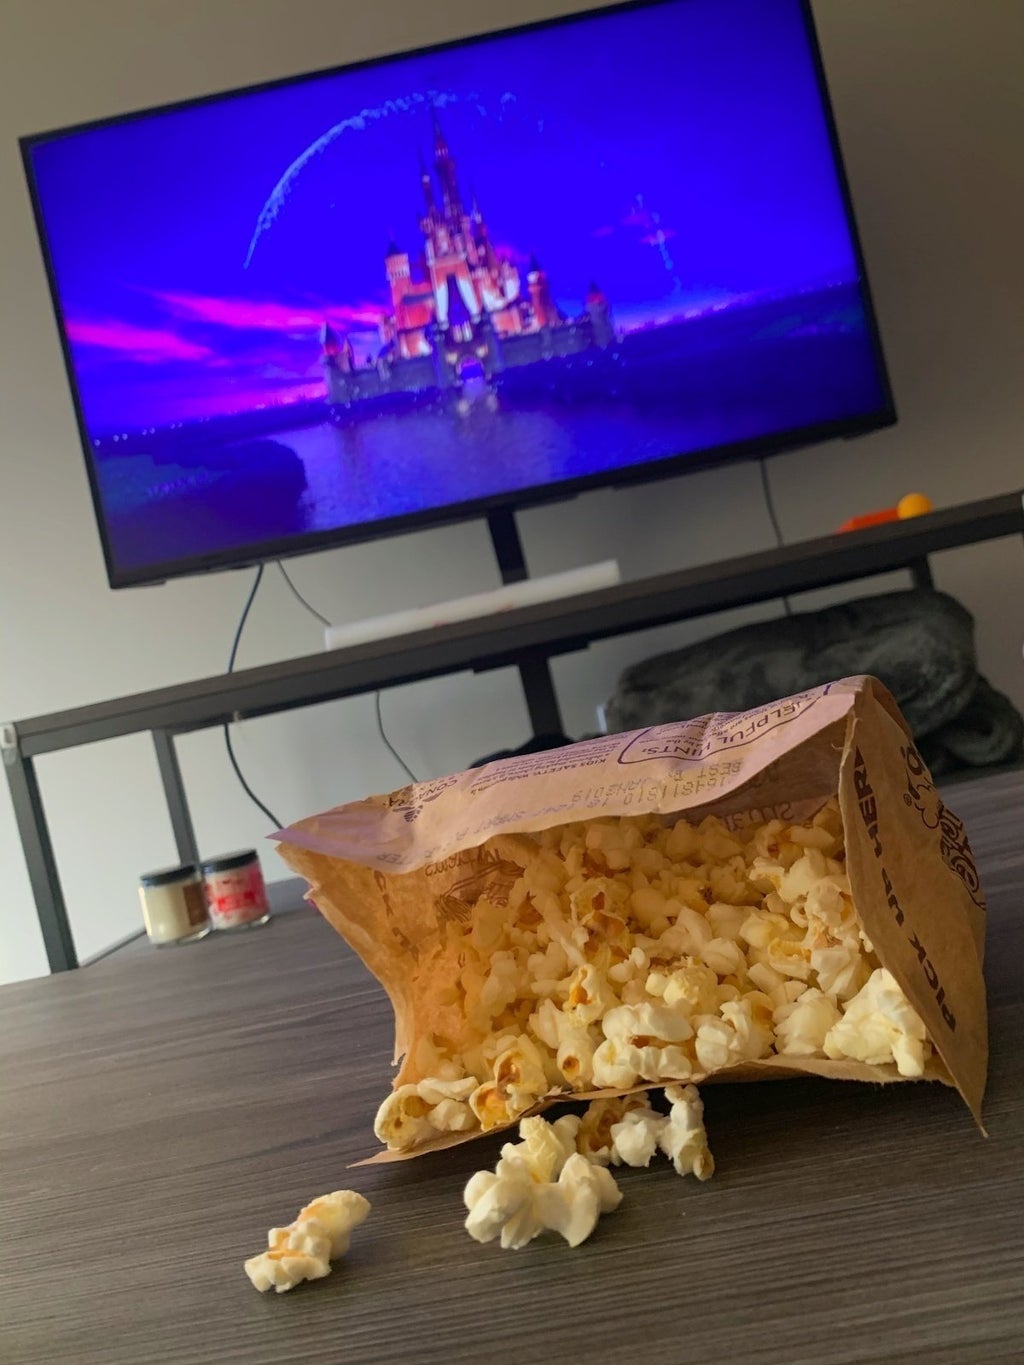 Popcorn and movie playing in the background